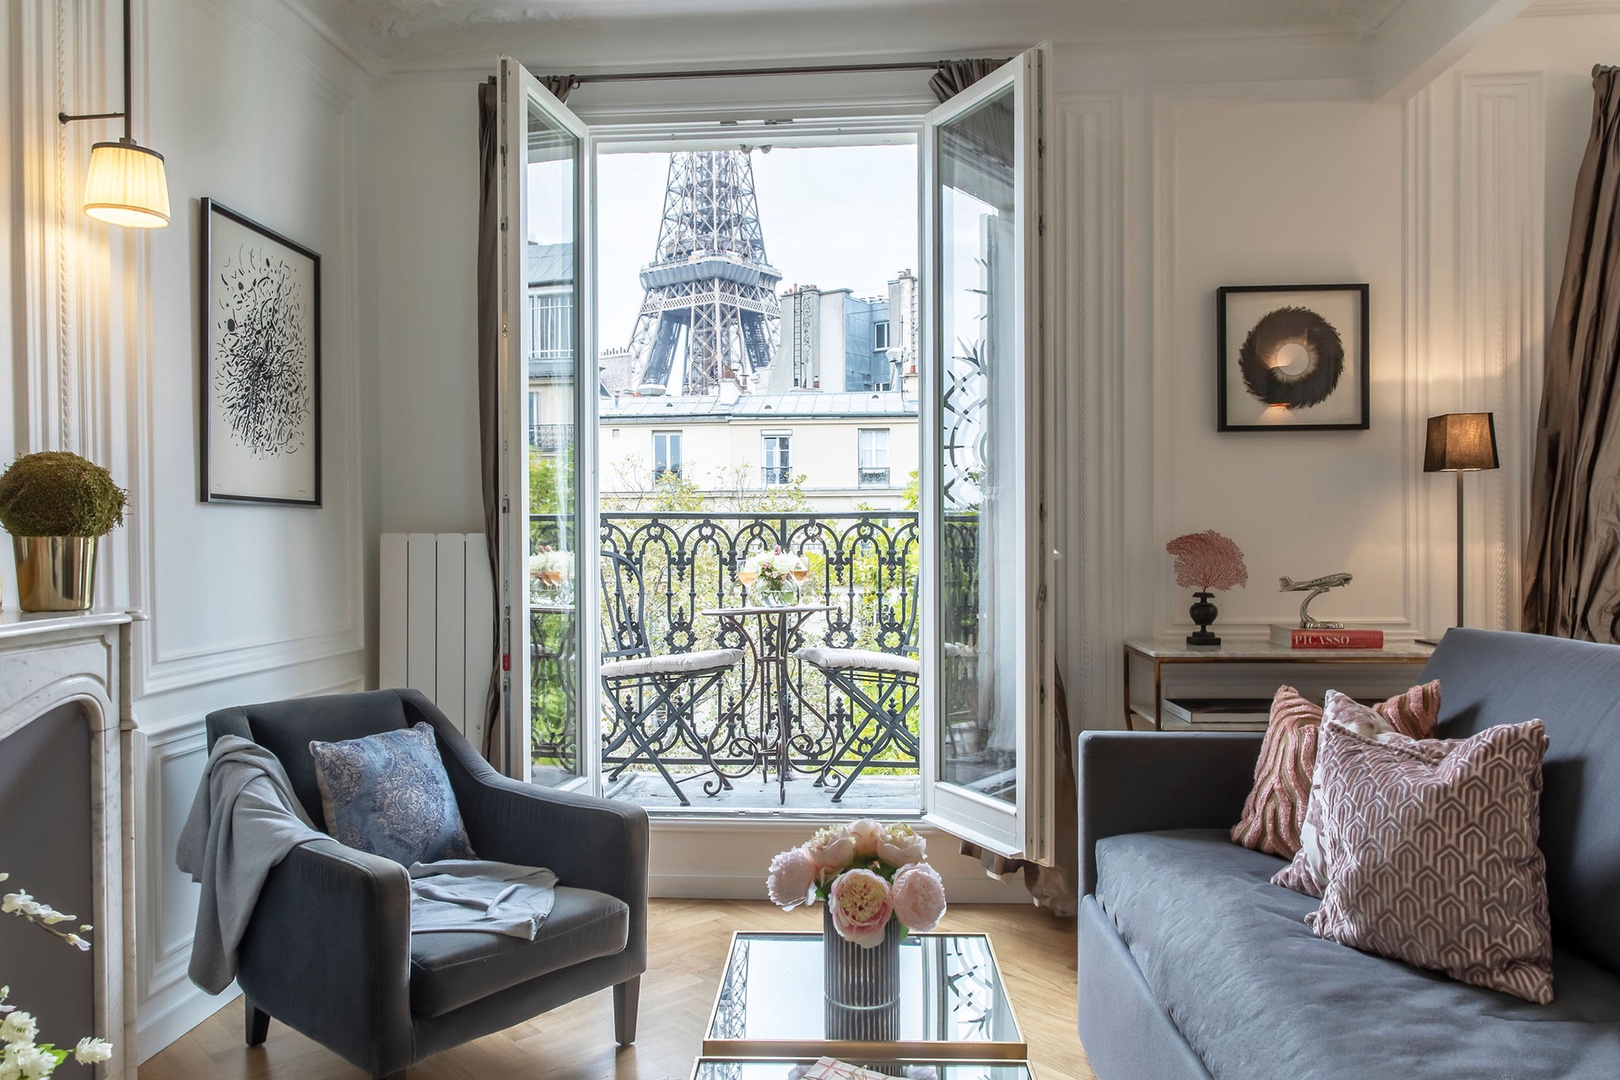 Sit back and relax with this view of the Eiffel Tower.